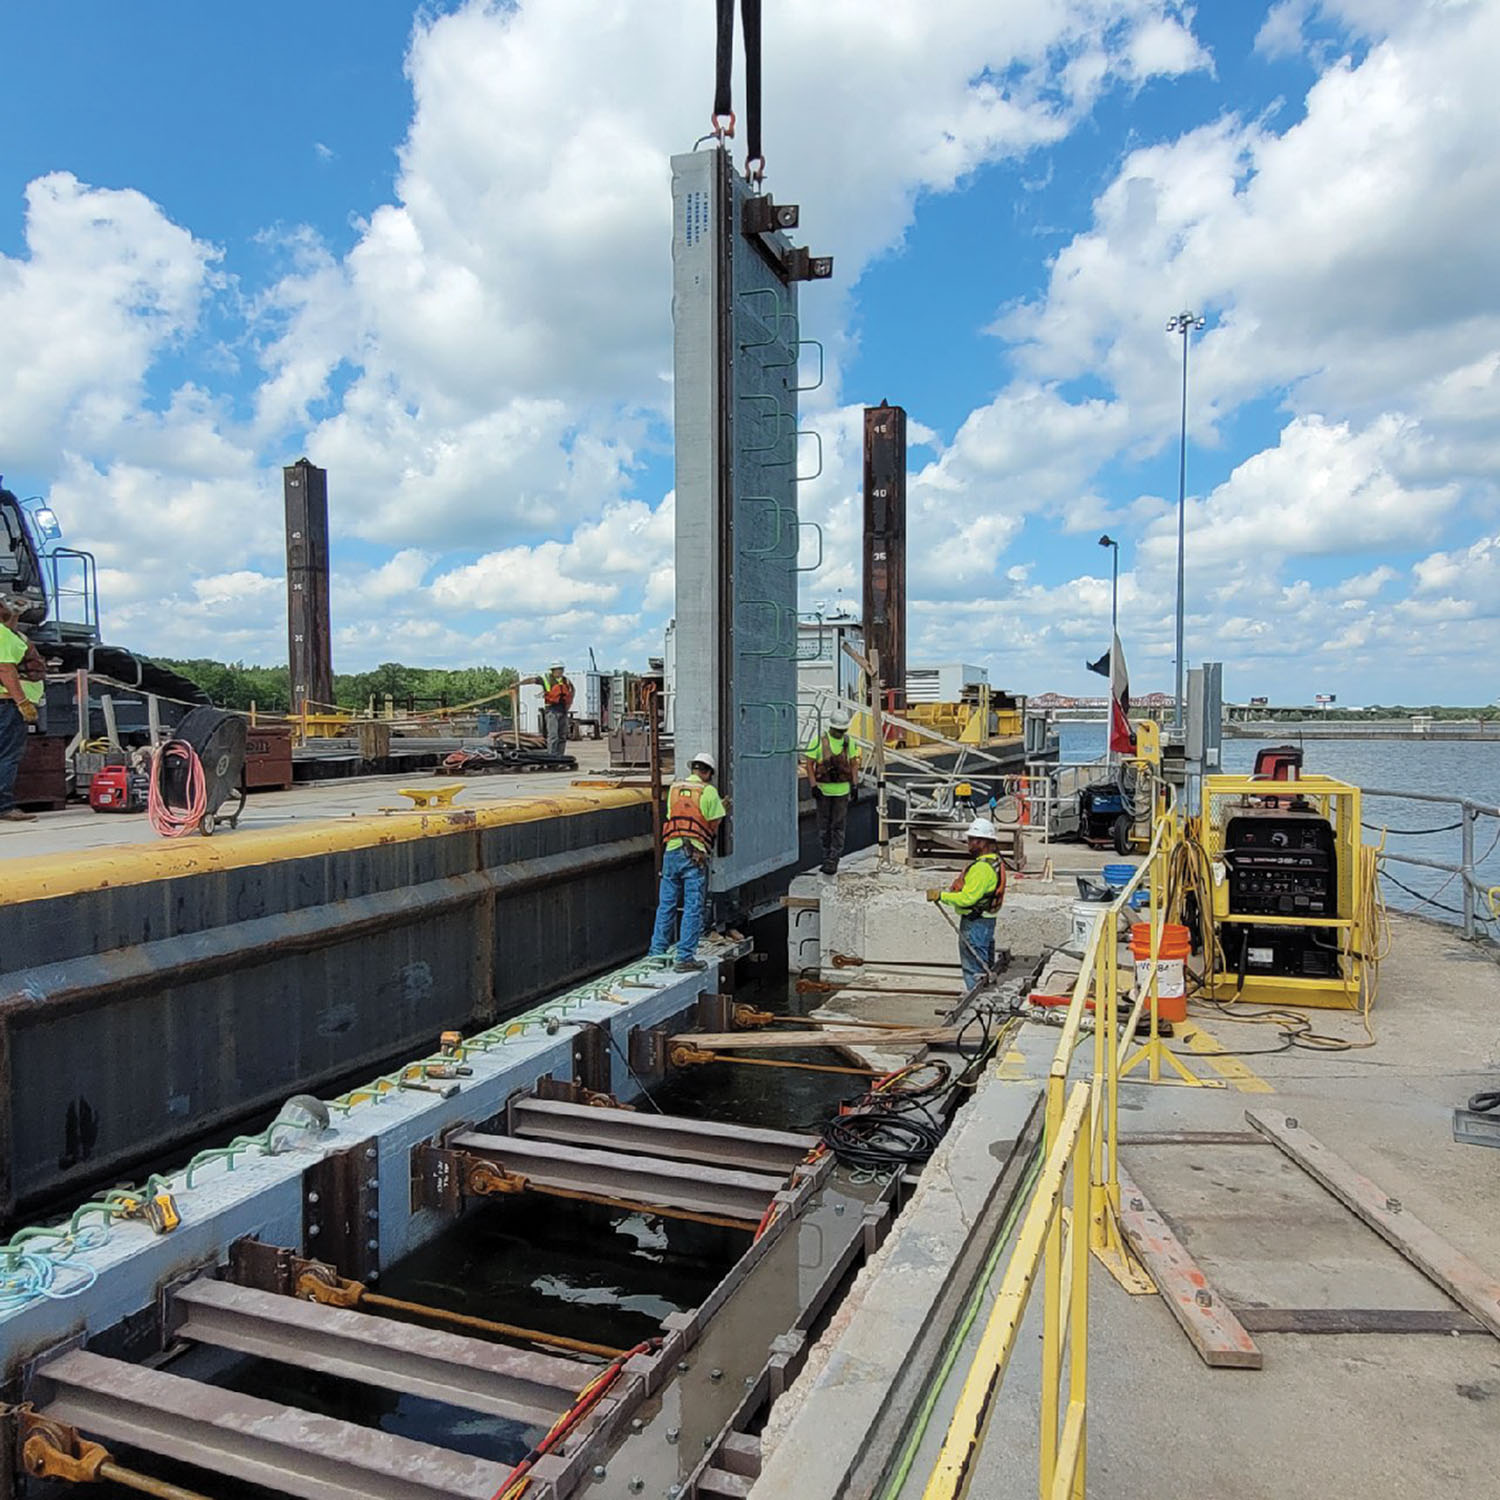 Crews install bulkhead recesses at Brandon Road Lock in August 2022 to prepare for a 2023 dewatering of the lock. (Photo courtesy of Rock Island Engineer District)